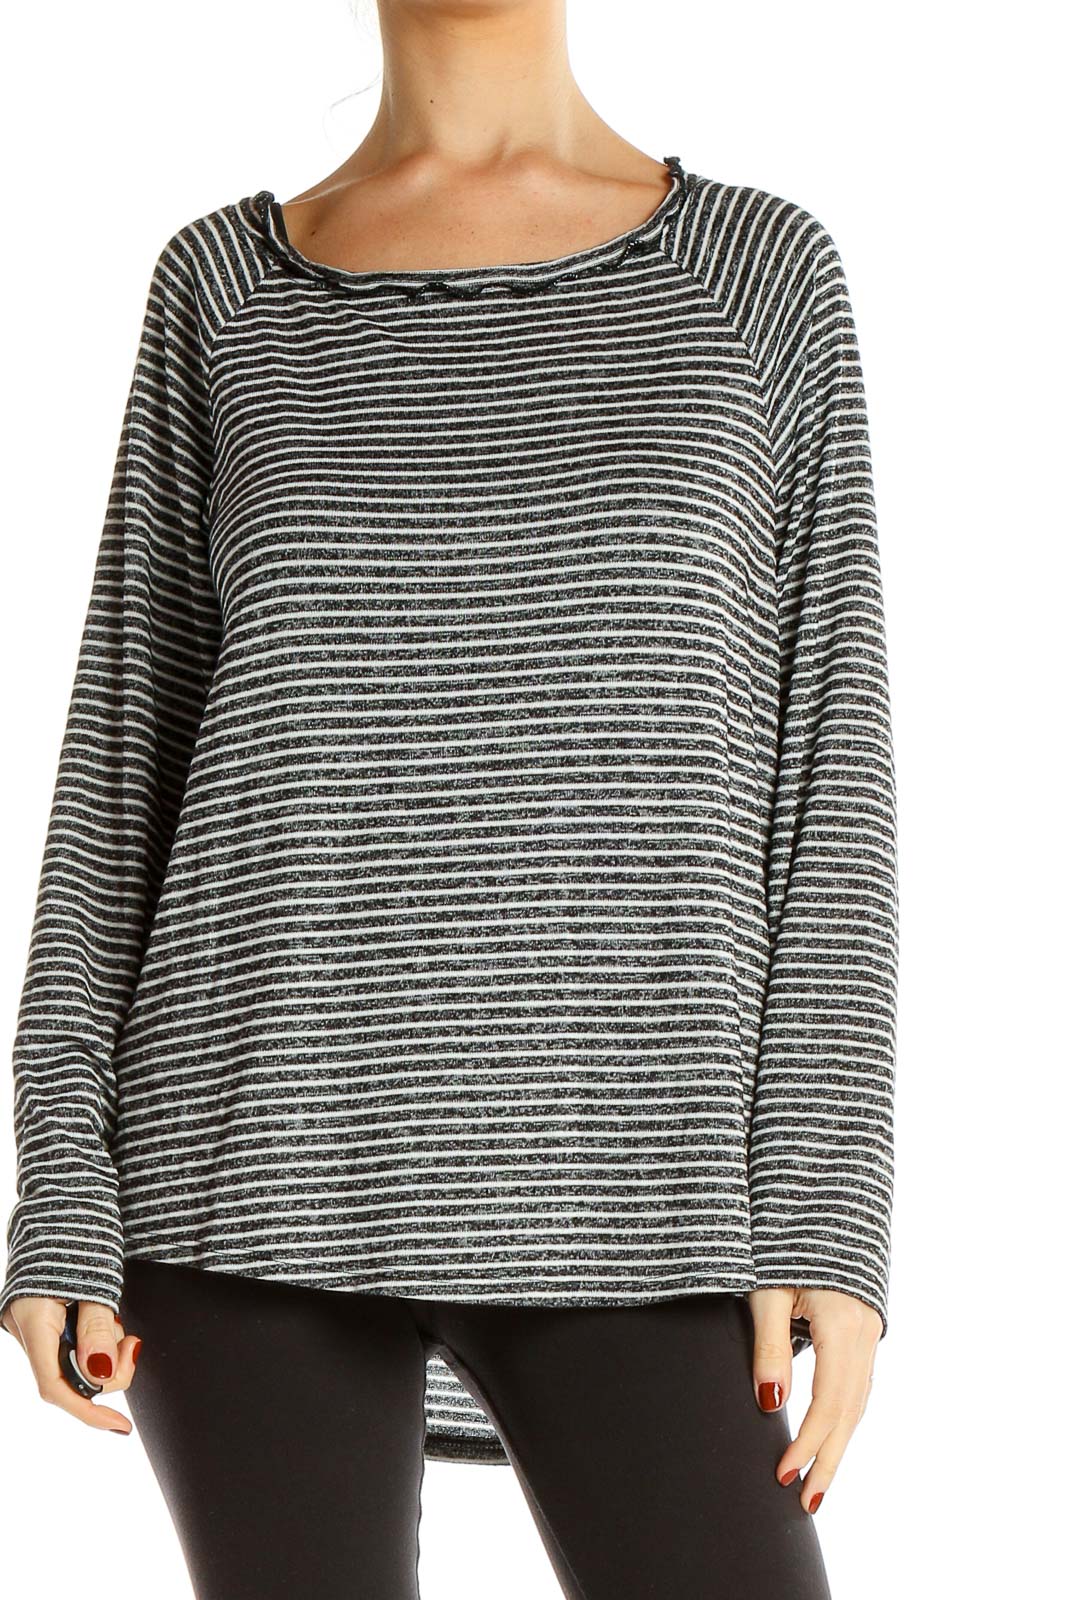 Black Striped All Day Wear Shirt Front